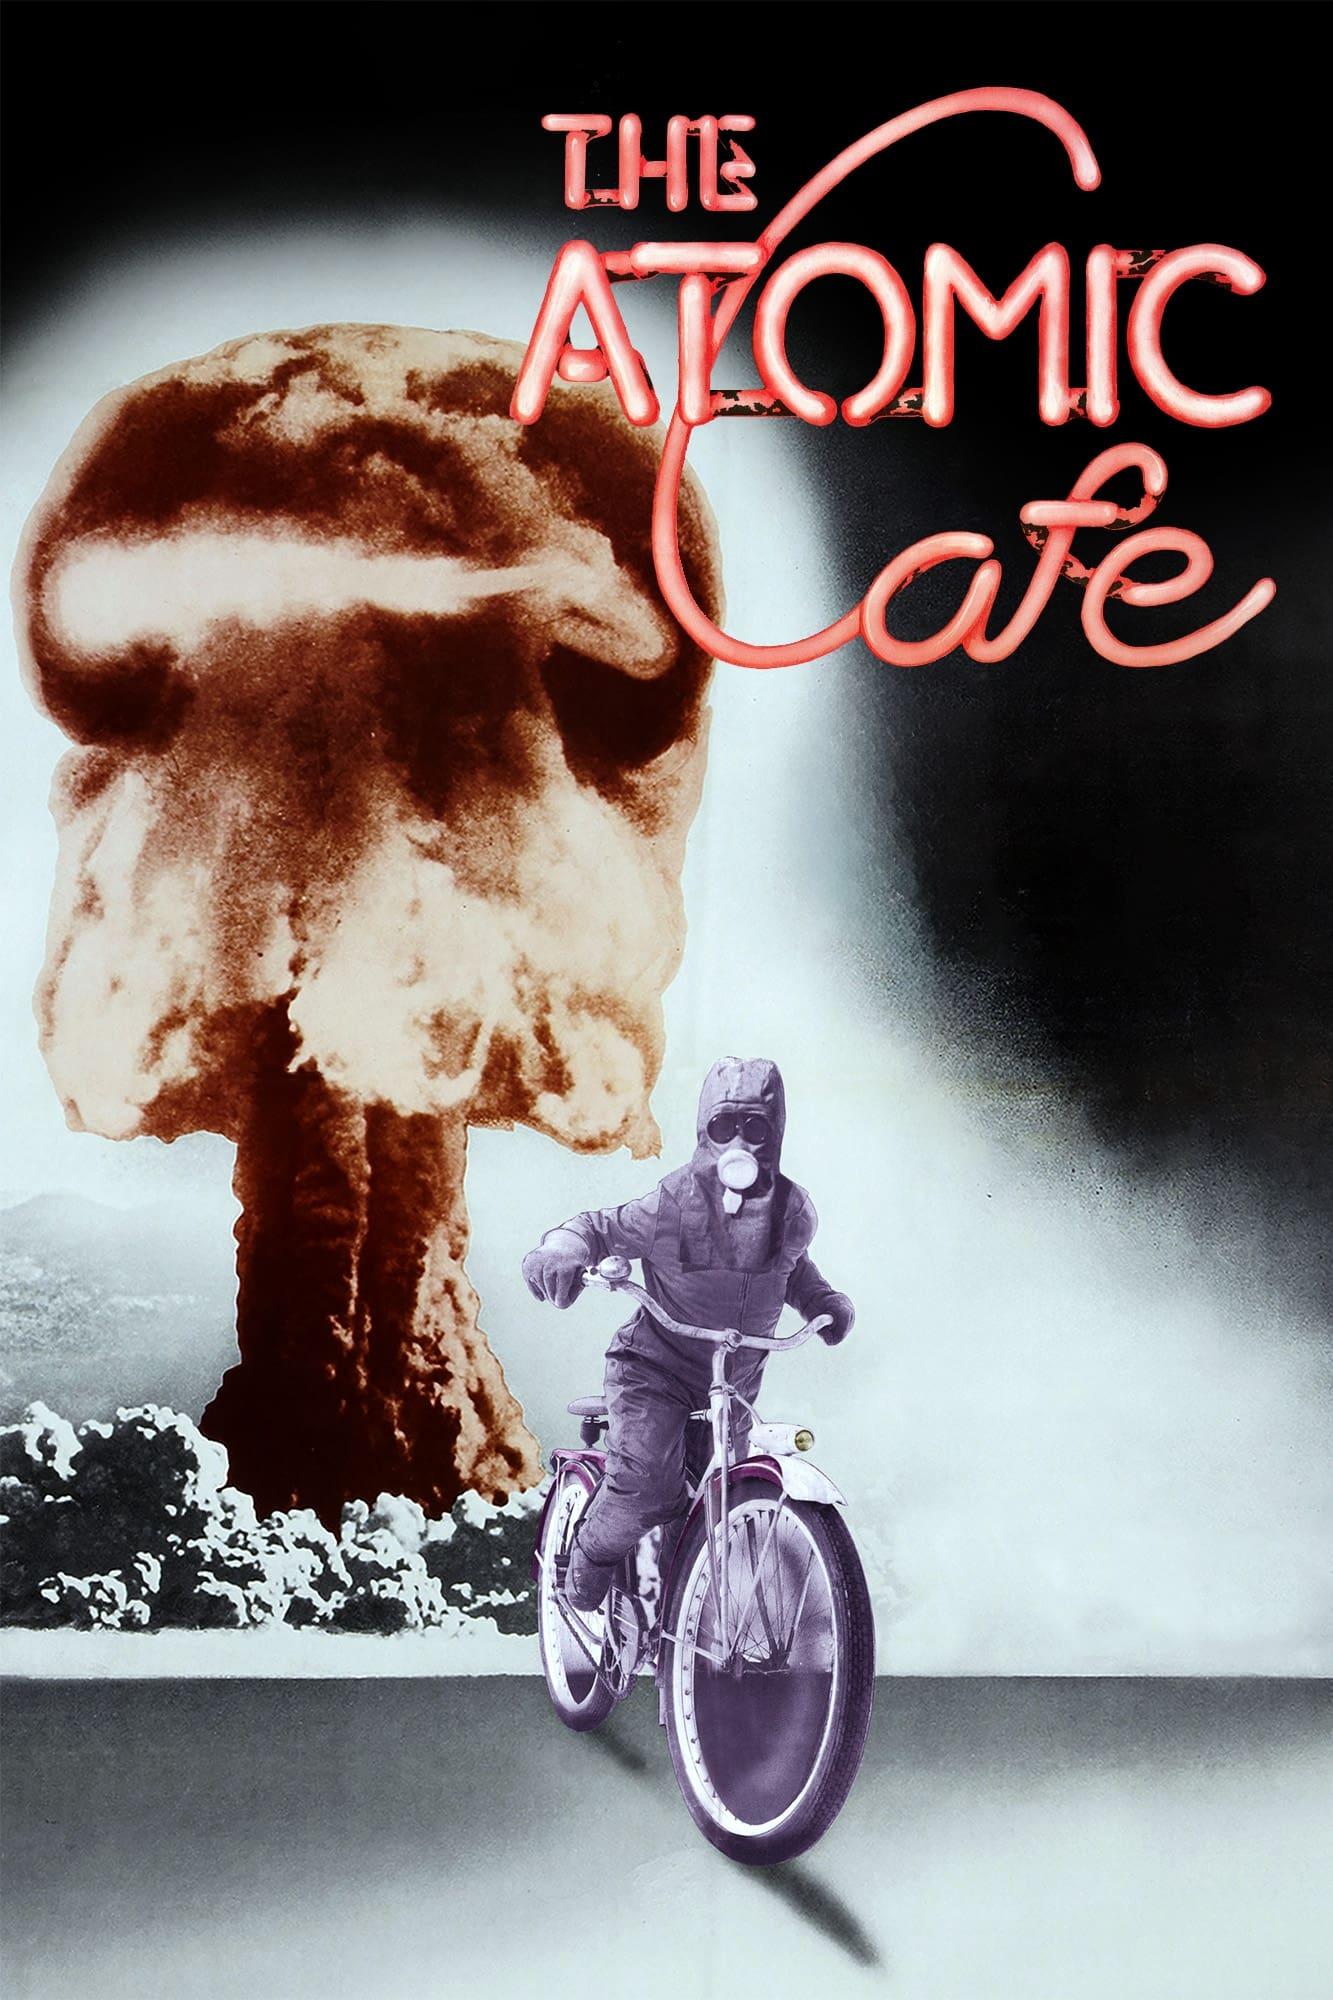 The Atomic Cafe poster